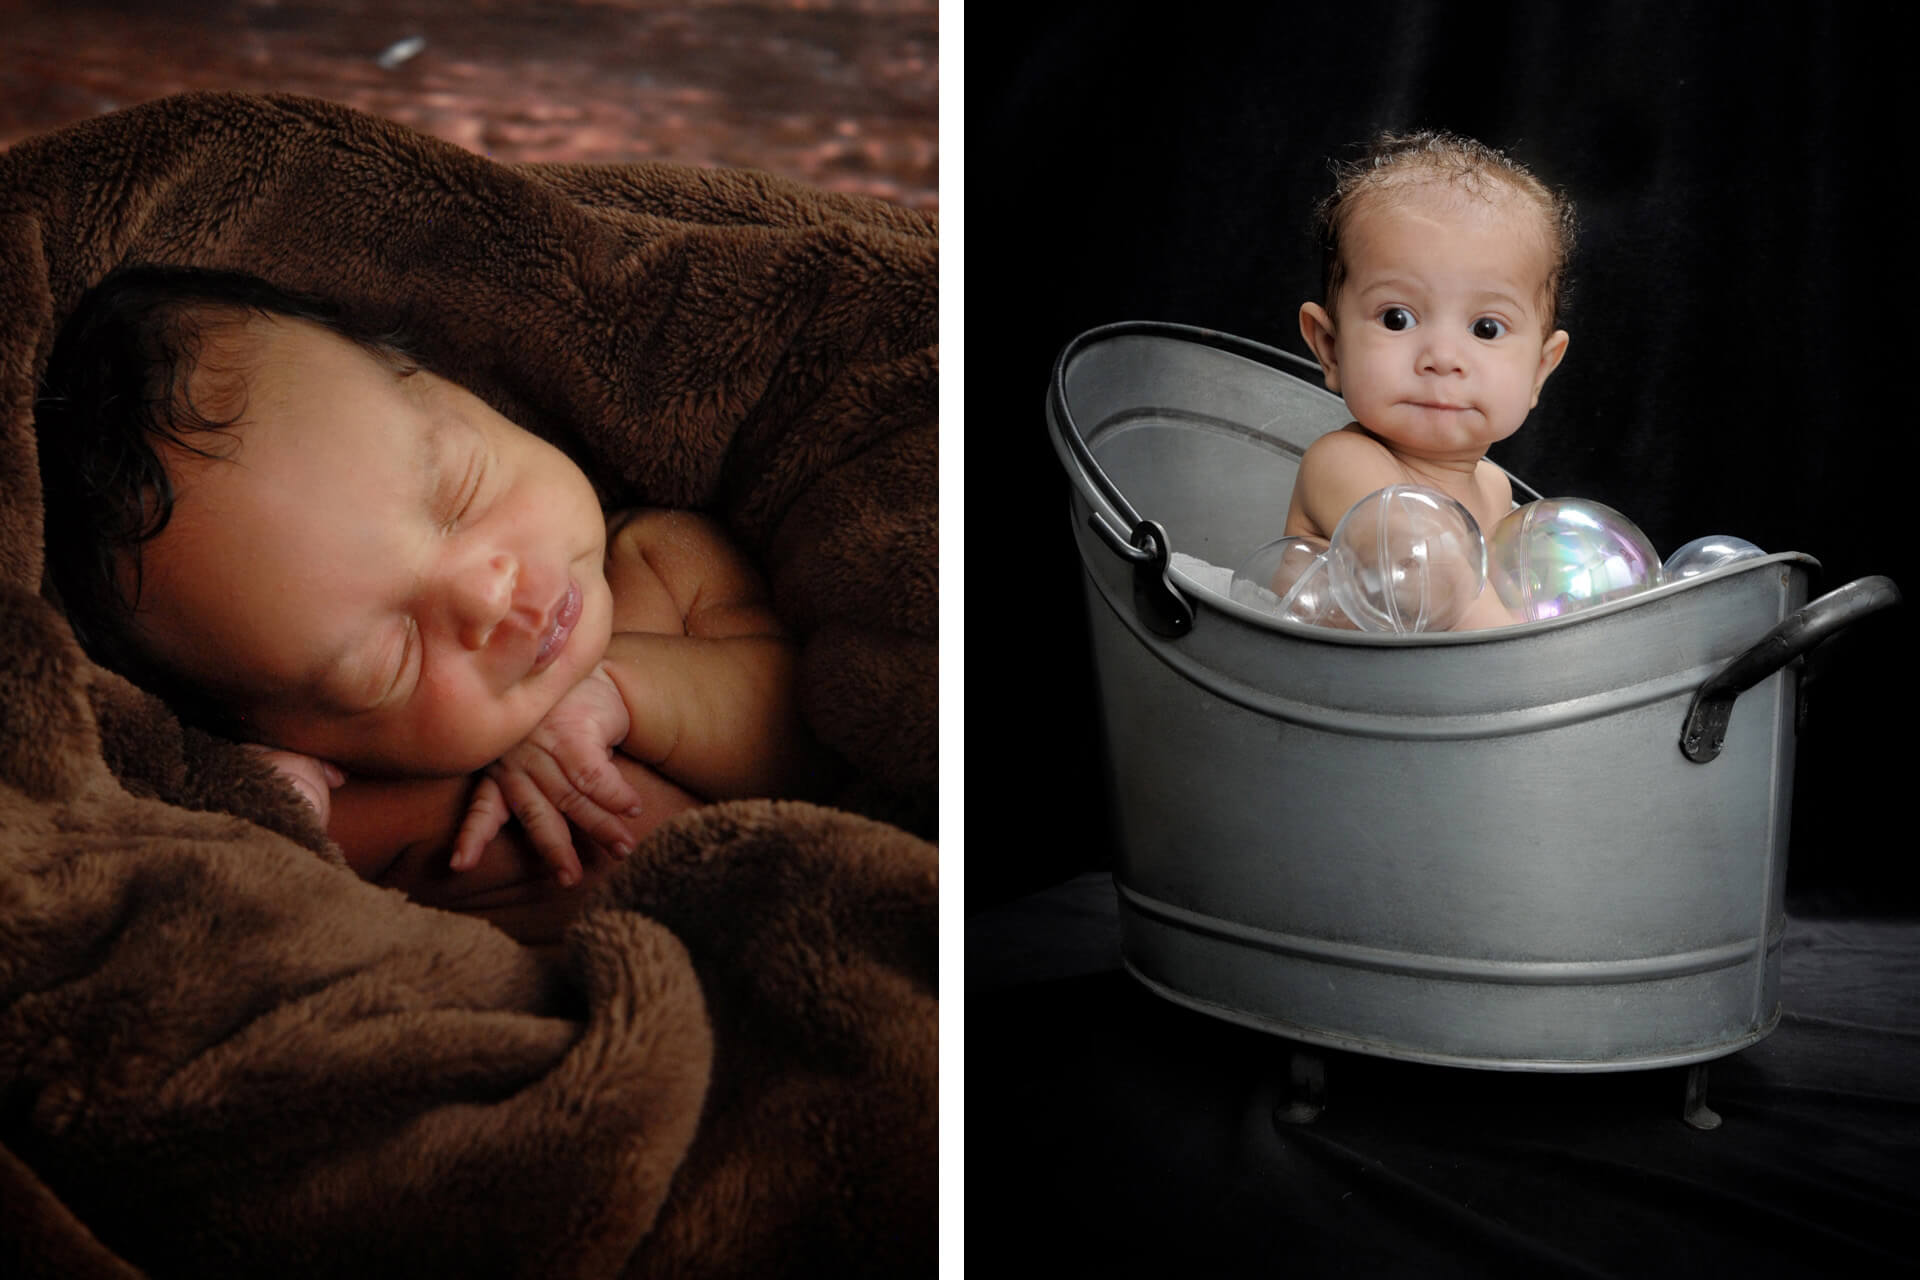 Best Detroit baby photographer captures classic newborn photography with a twist towards also capturing their personalities in metro Detroit, Michigan.